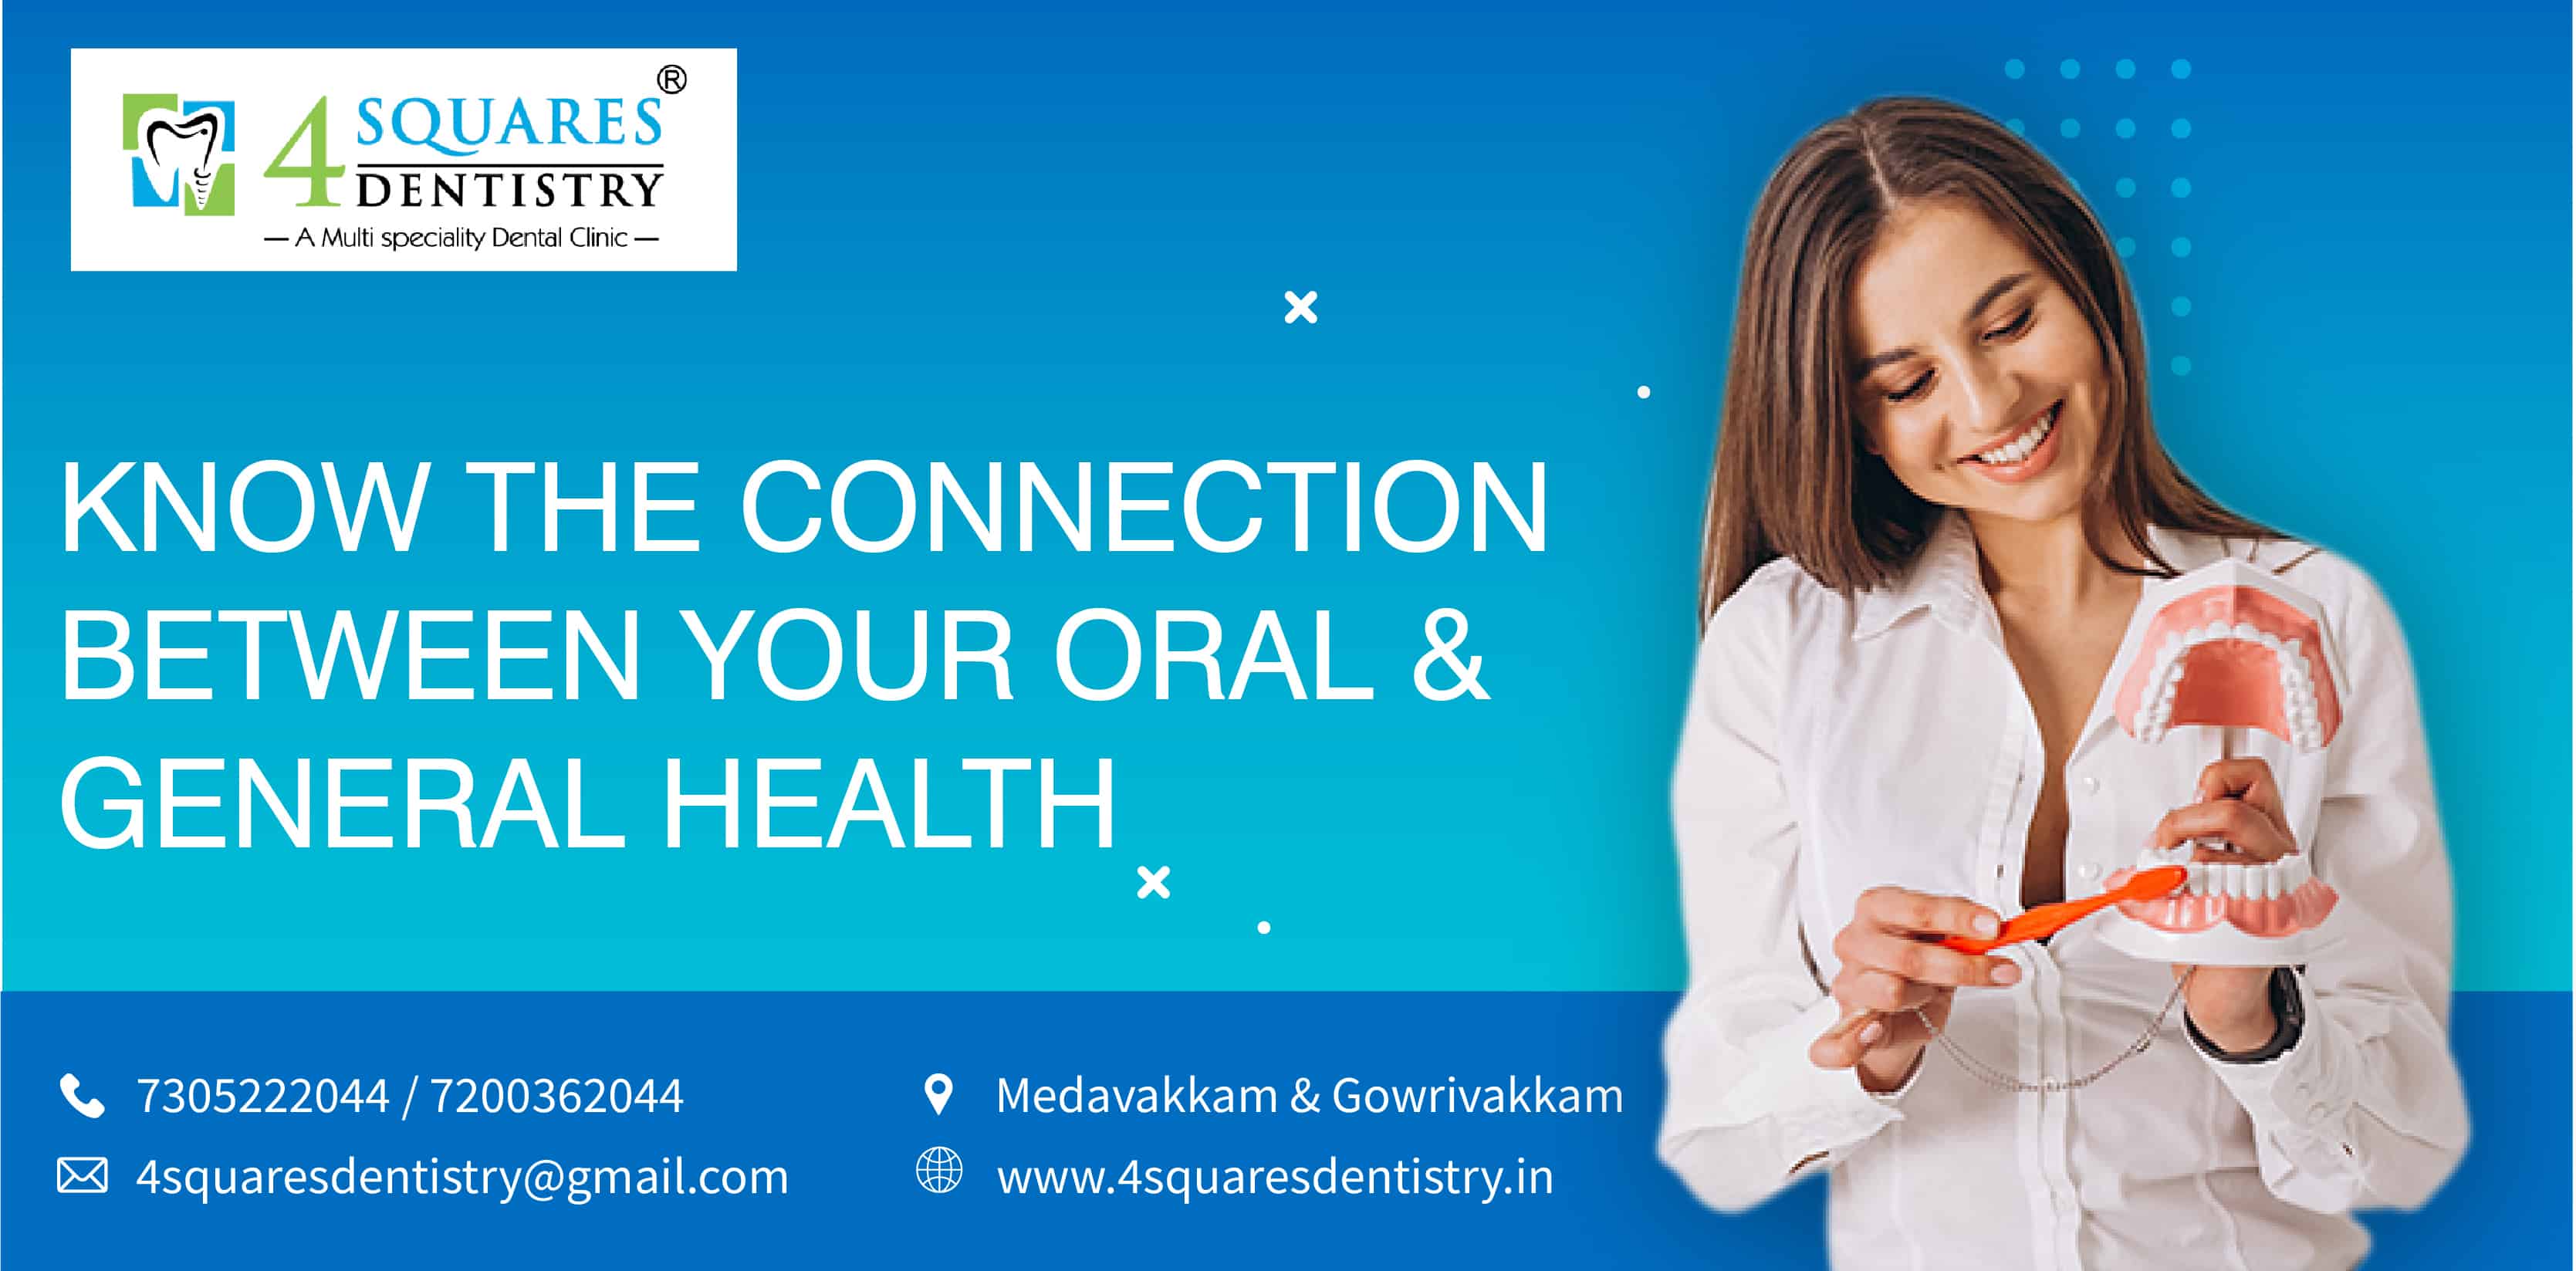 Dental model is being brushed by a woman. One of the leading dentist in Medavakkam, discusses the relationship between oral health and overall health.